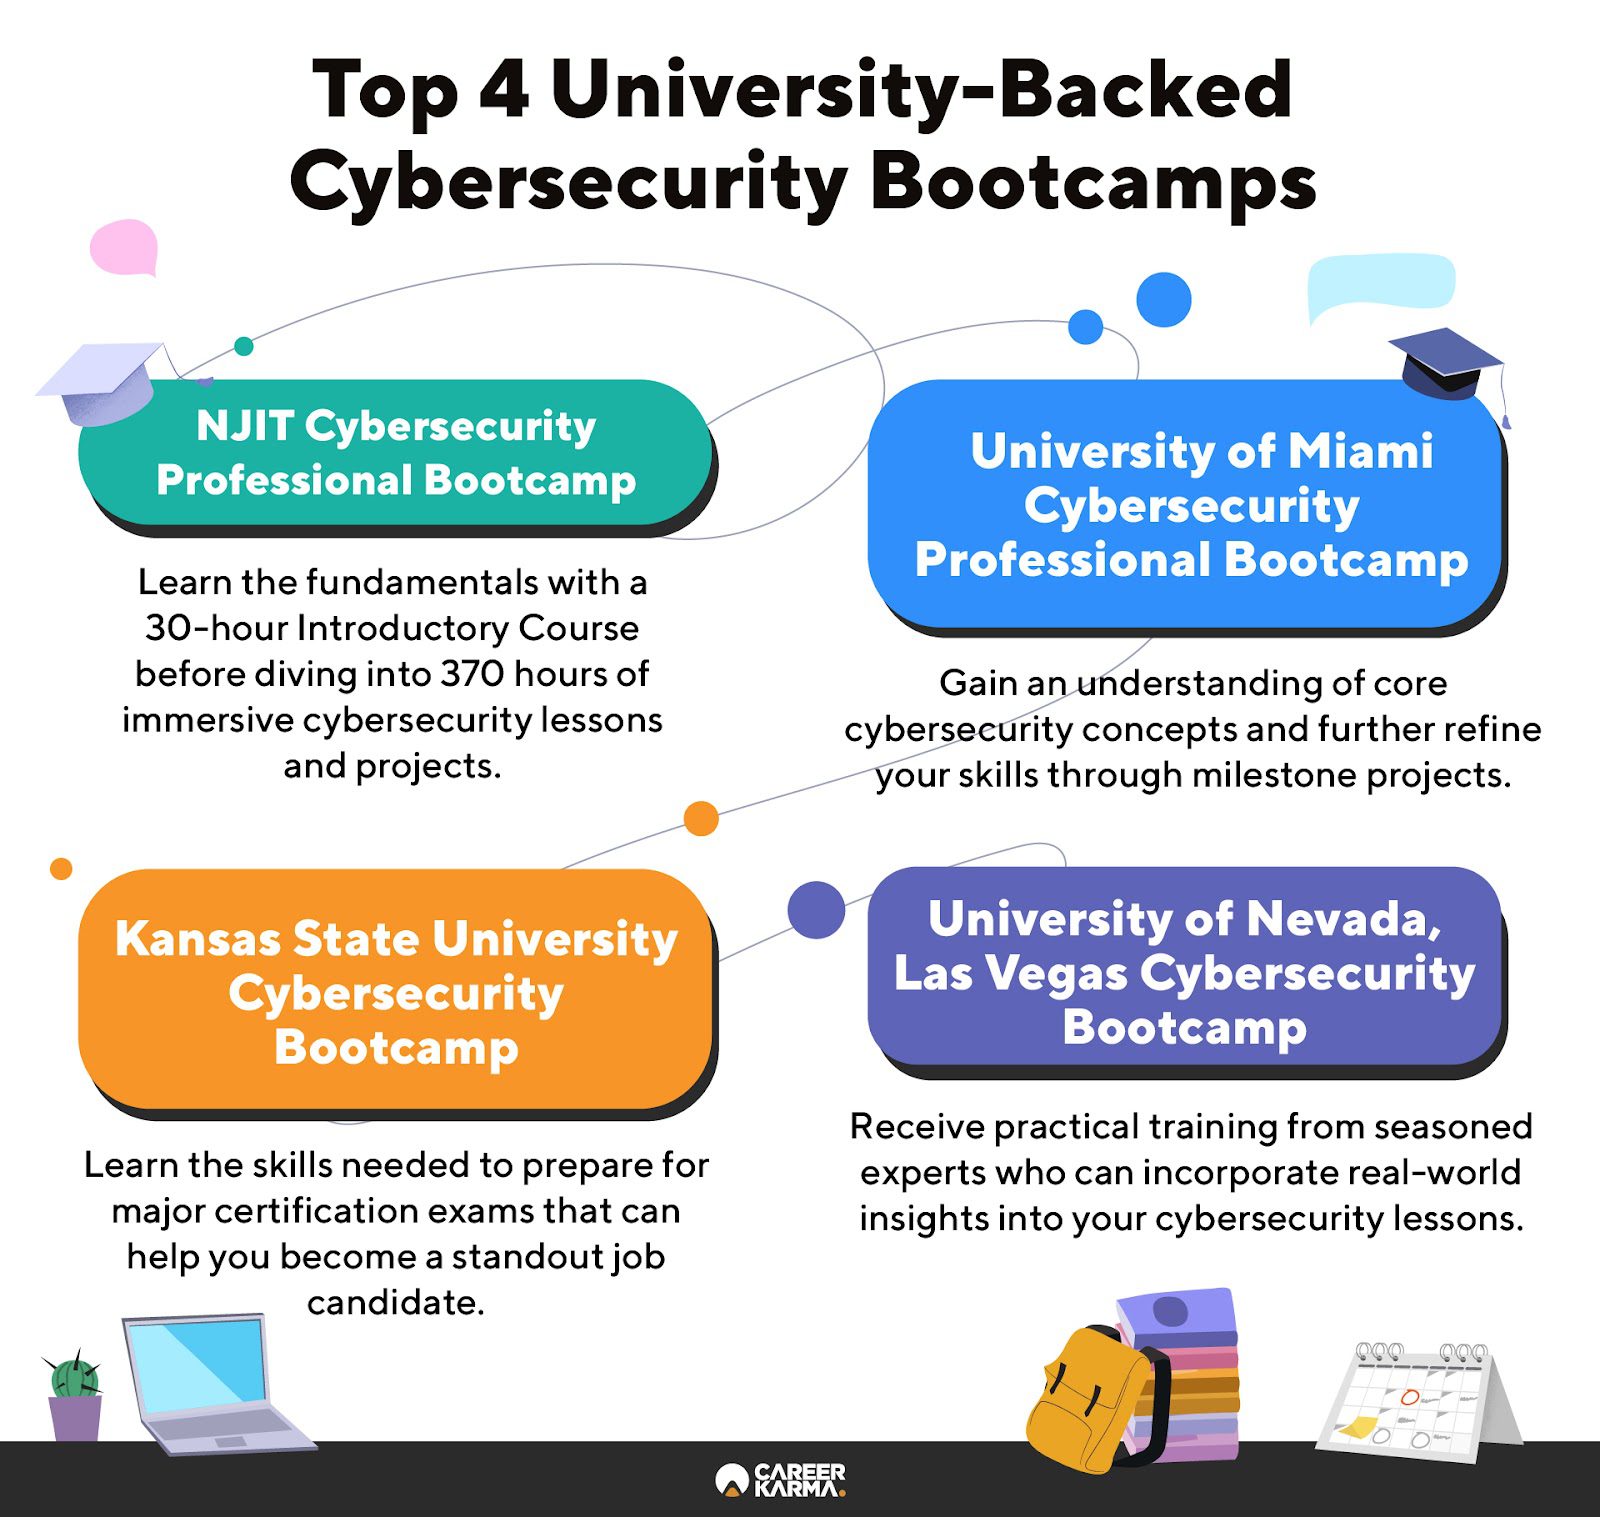 An infographic featuring the top four university-backed cybersecurity bootcamps